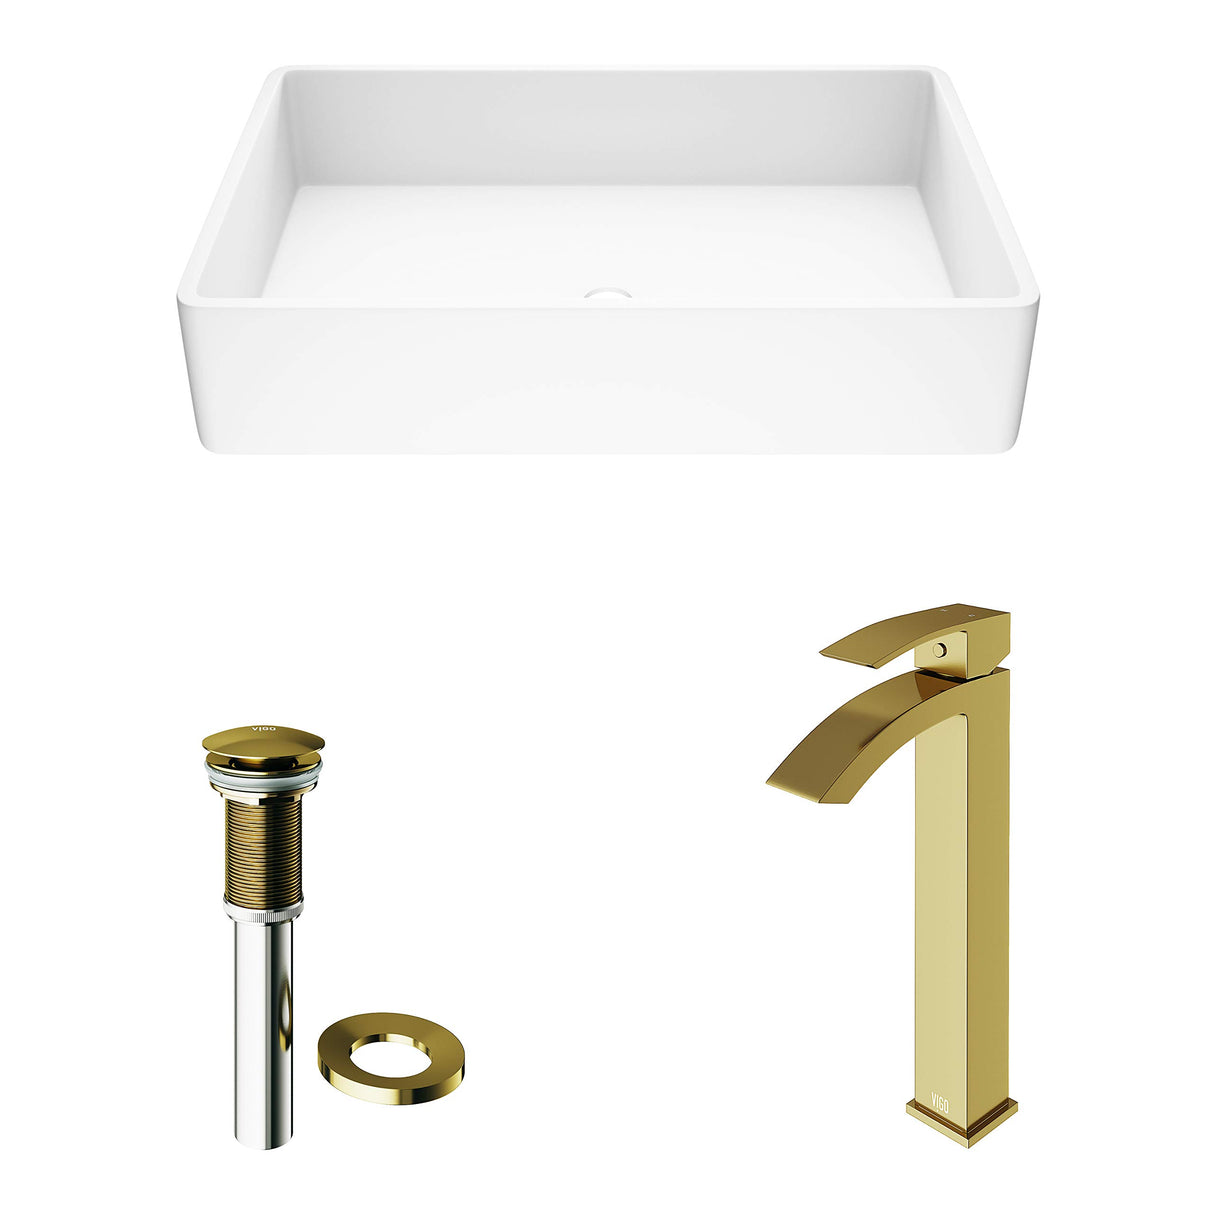 VIGO VGT1458 13.88" L -21.25" W -12.0" H Handmade Countertop White Matte Stone Rectangle Vessel Bathroom Sink Set in Matte White Finish with Faucet in Matte Brushed Gold and Pop Up Drain